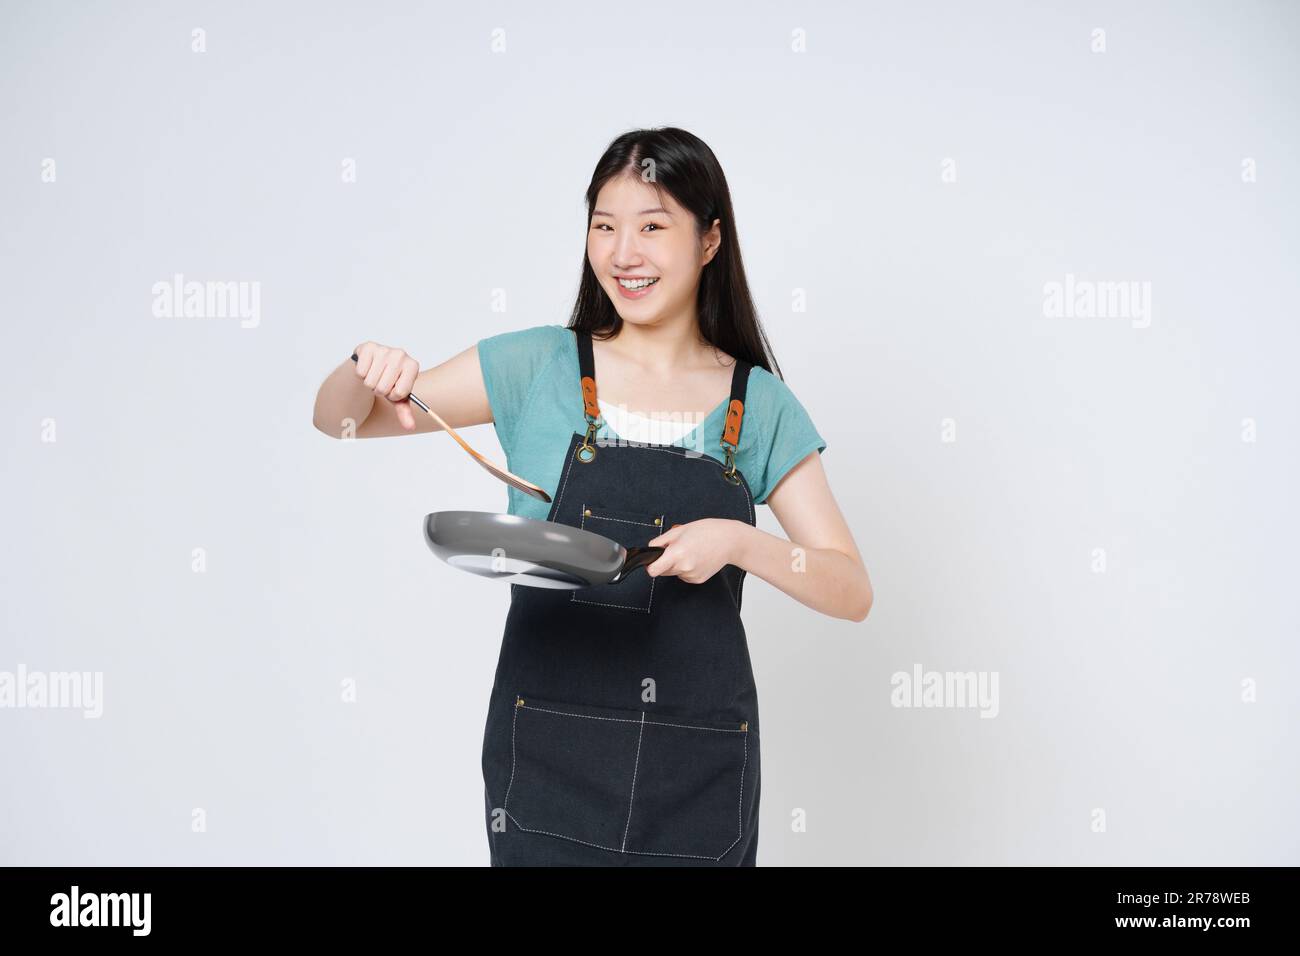 Young woman wearing kitchen apron cooking and holding pan and spatula isolated on white background. Stock Photo